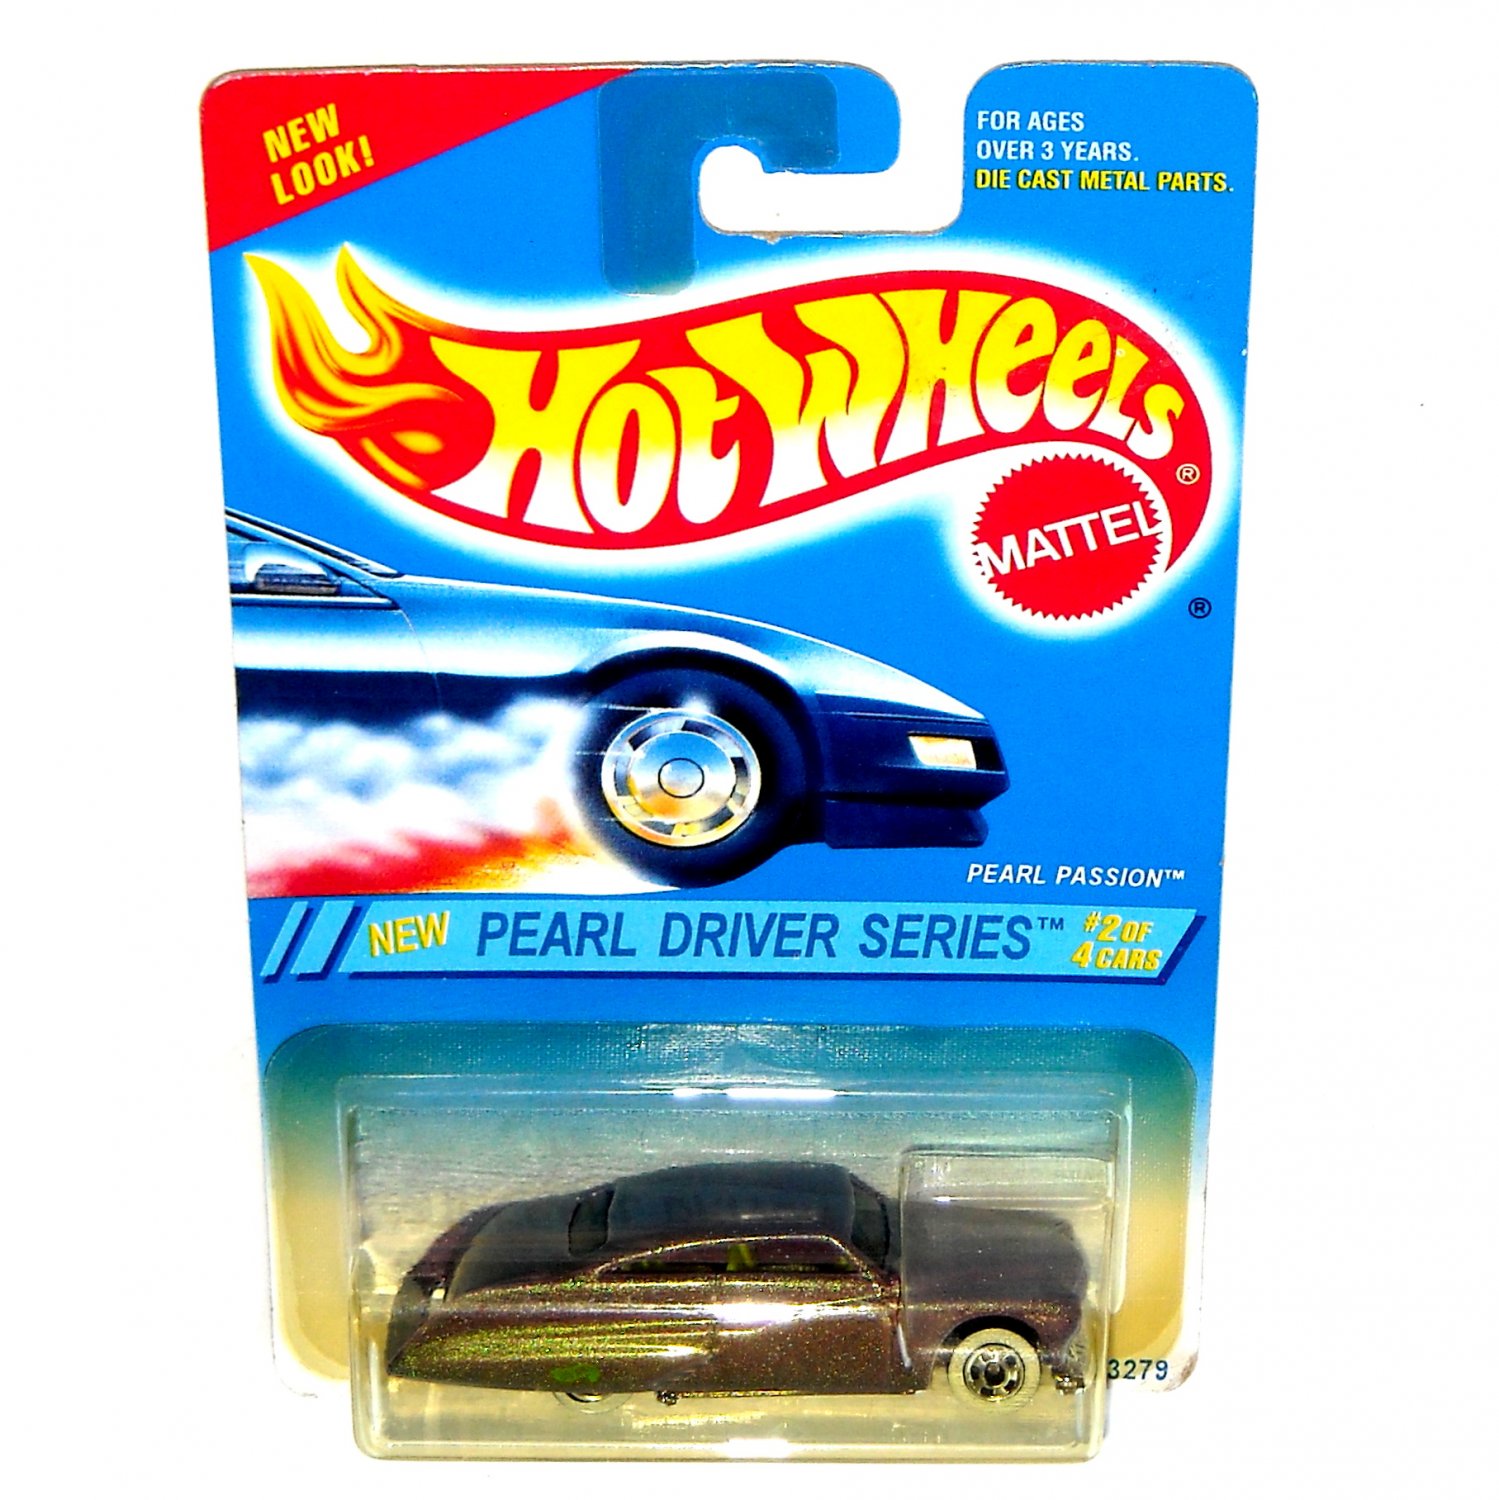 Pearl Passion Pearl Driver Series     Hot Wheels